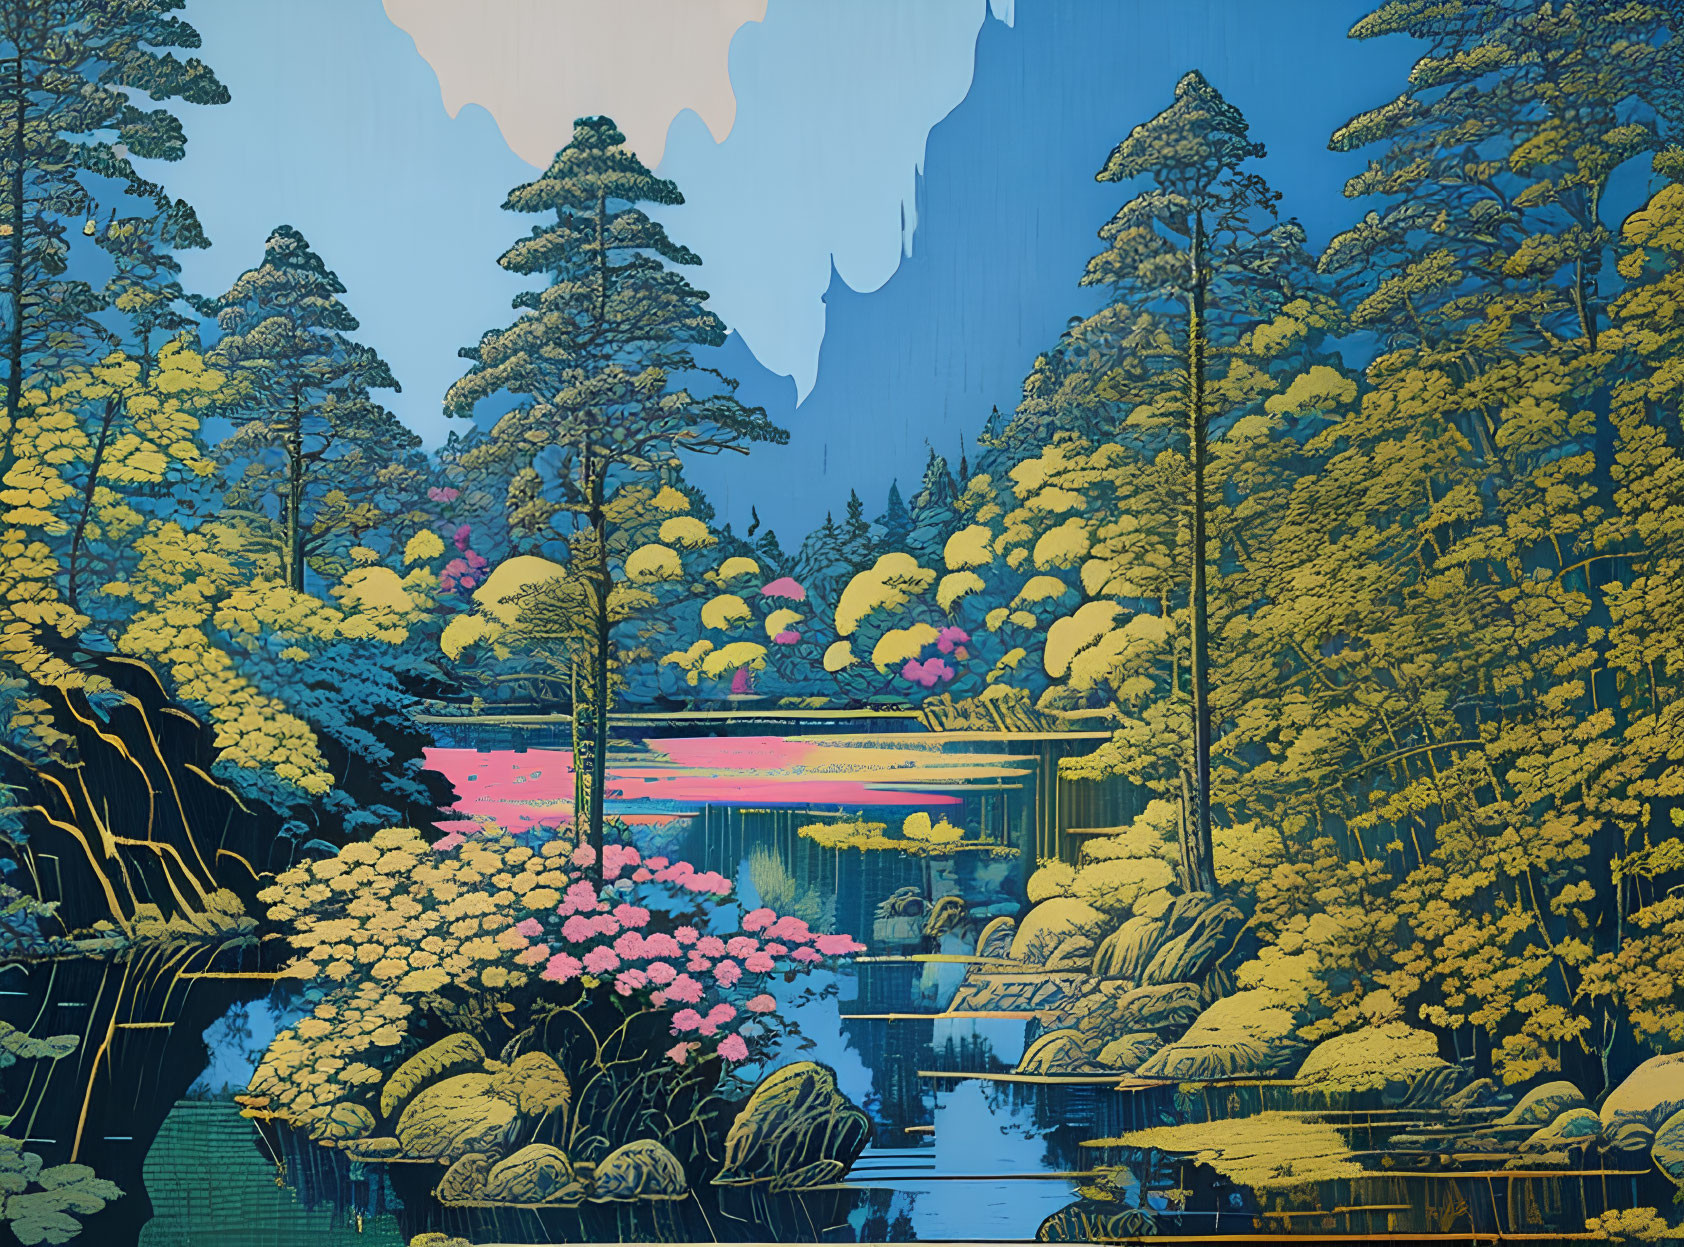 Stylized digital landscape with vibrant forest and pink water reflections